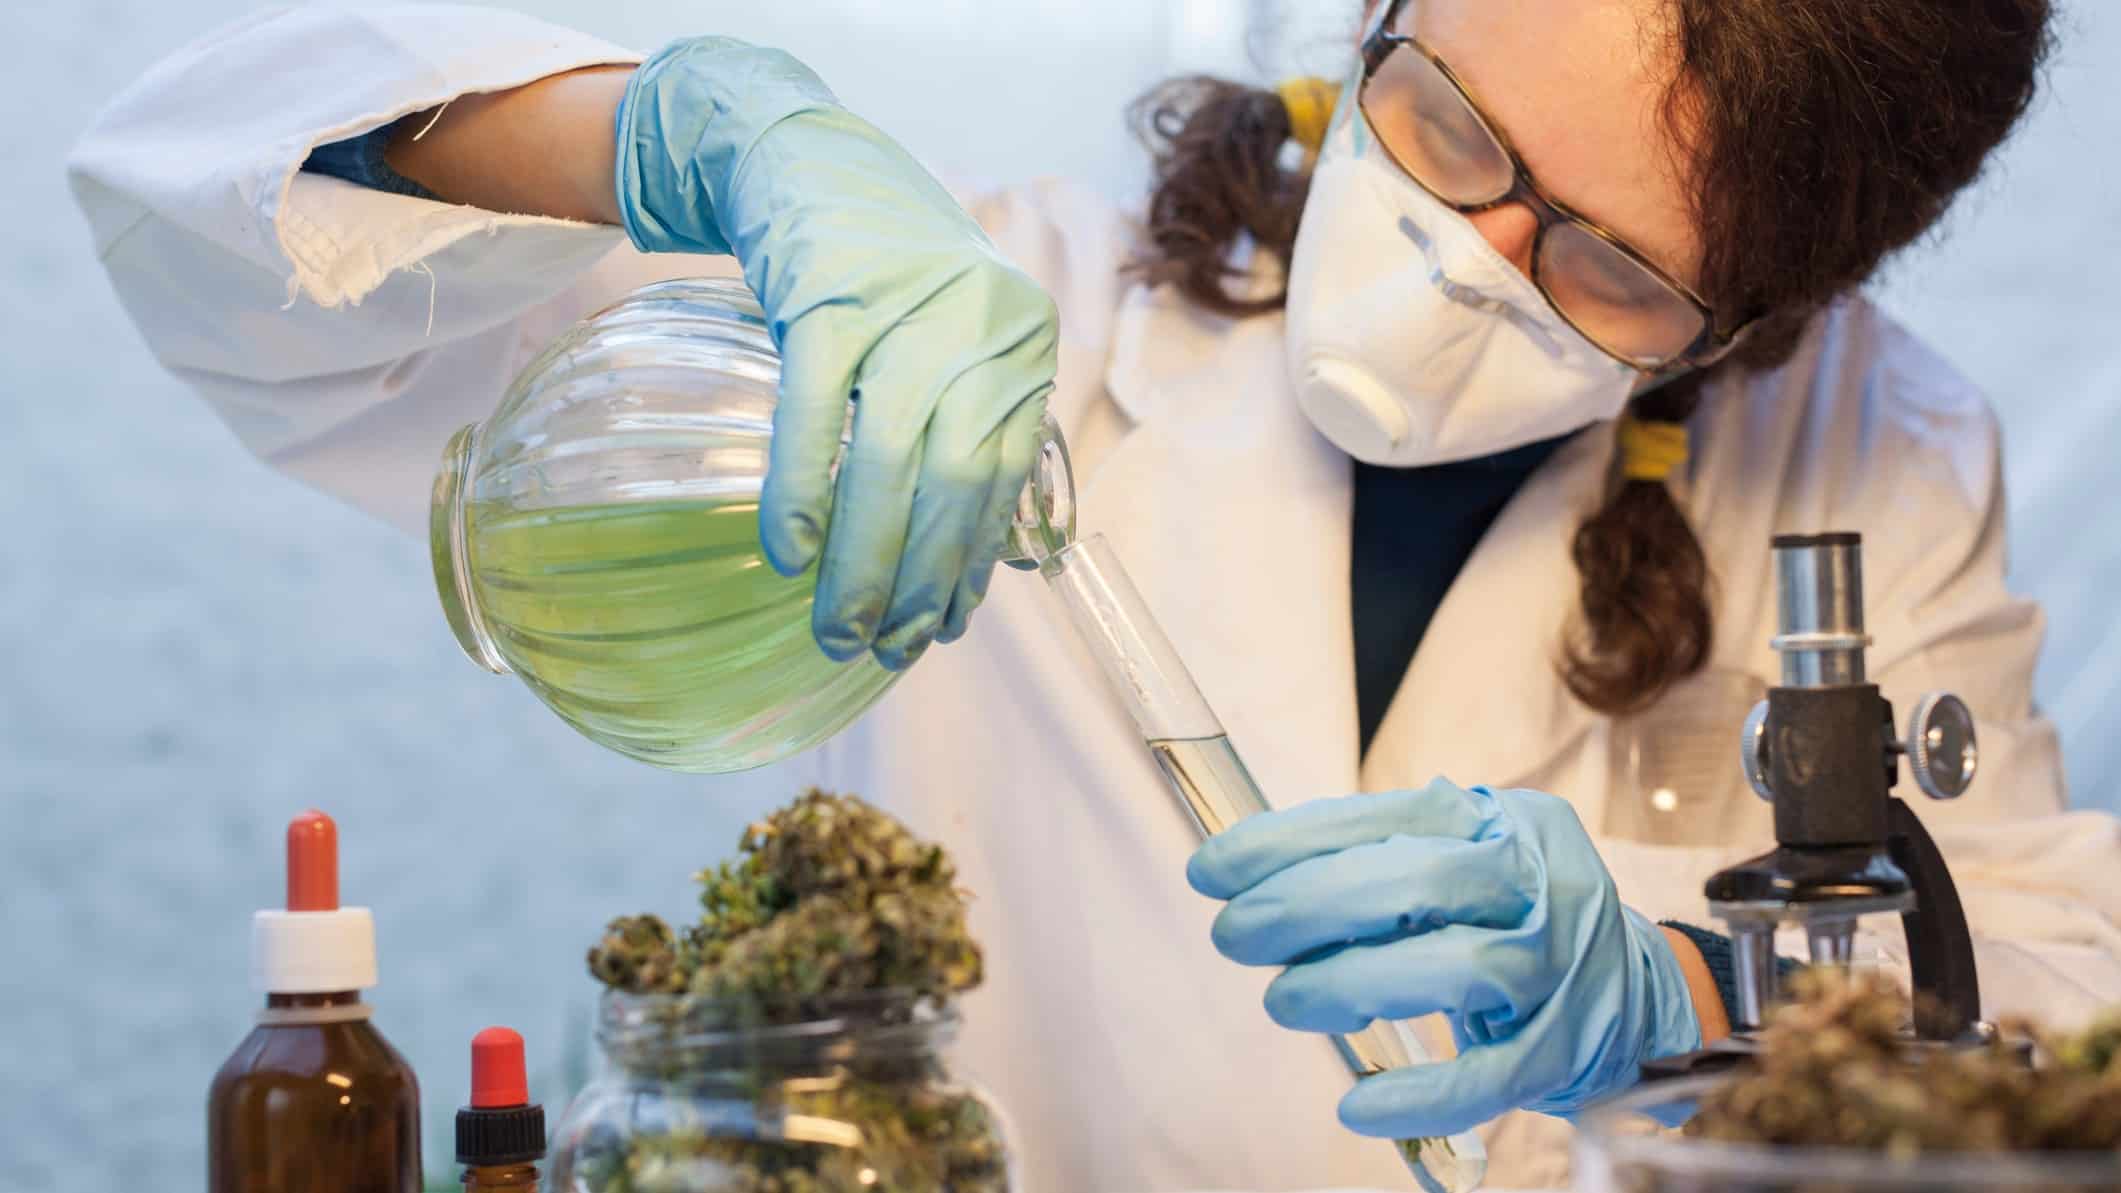 women working with medicinal marijuana, indicating a share price movement in ASX cannabis shares